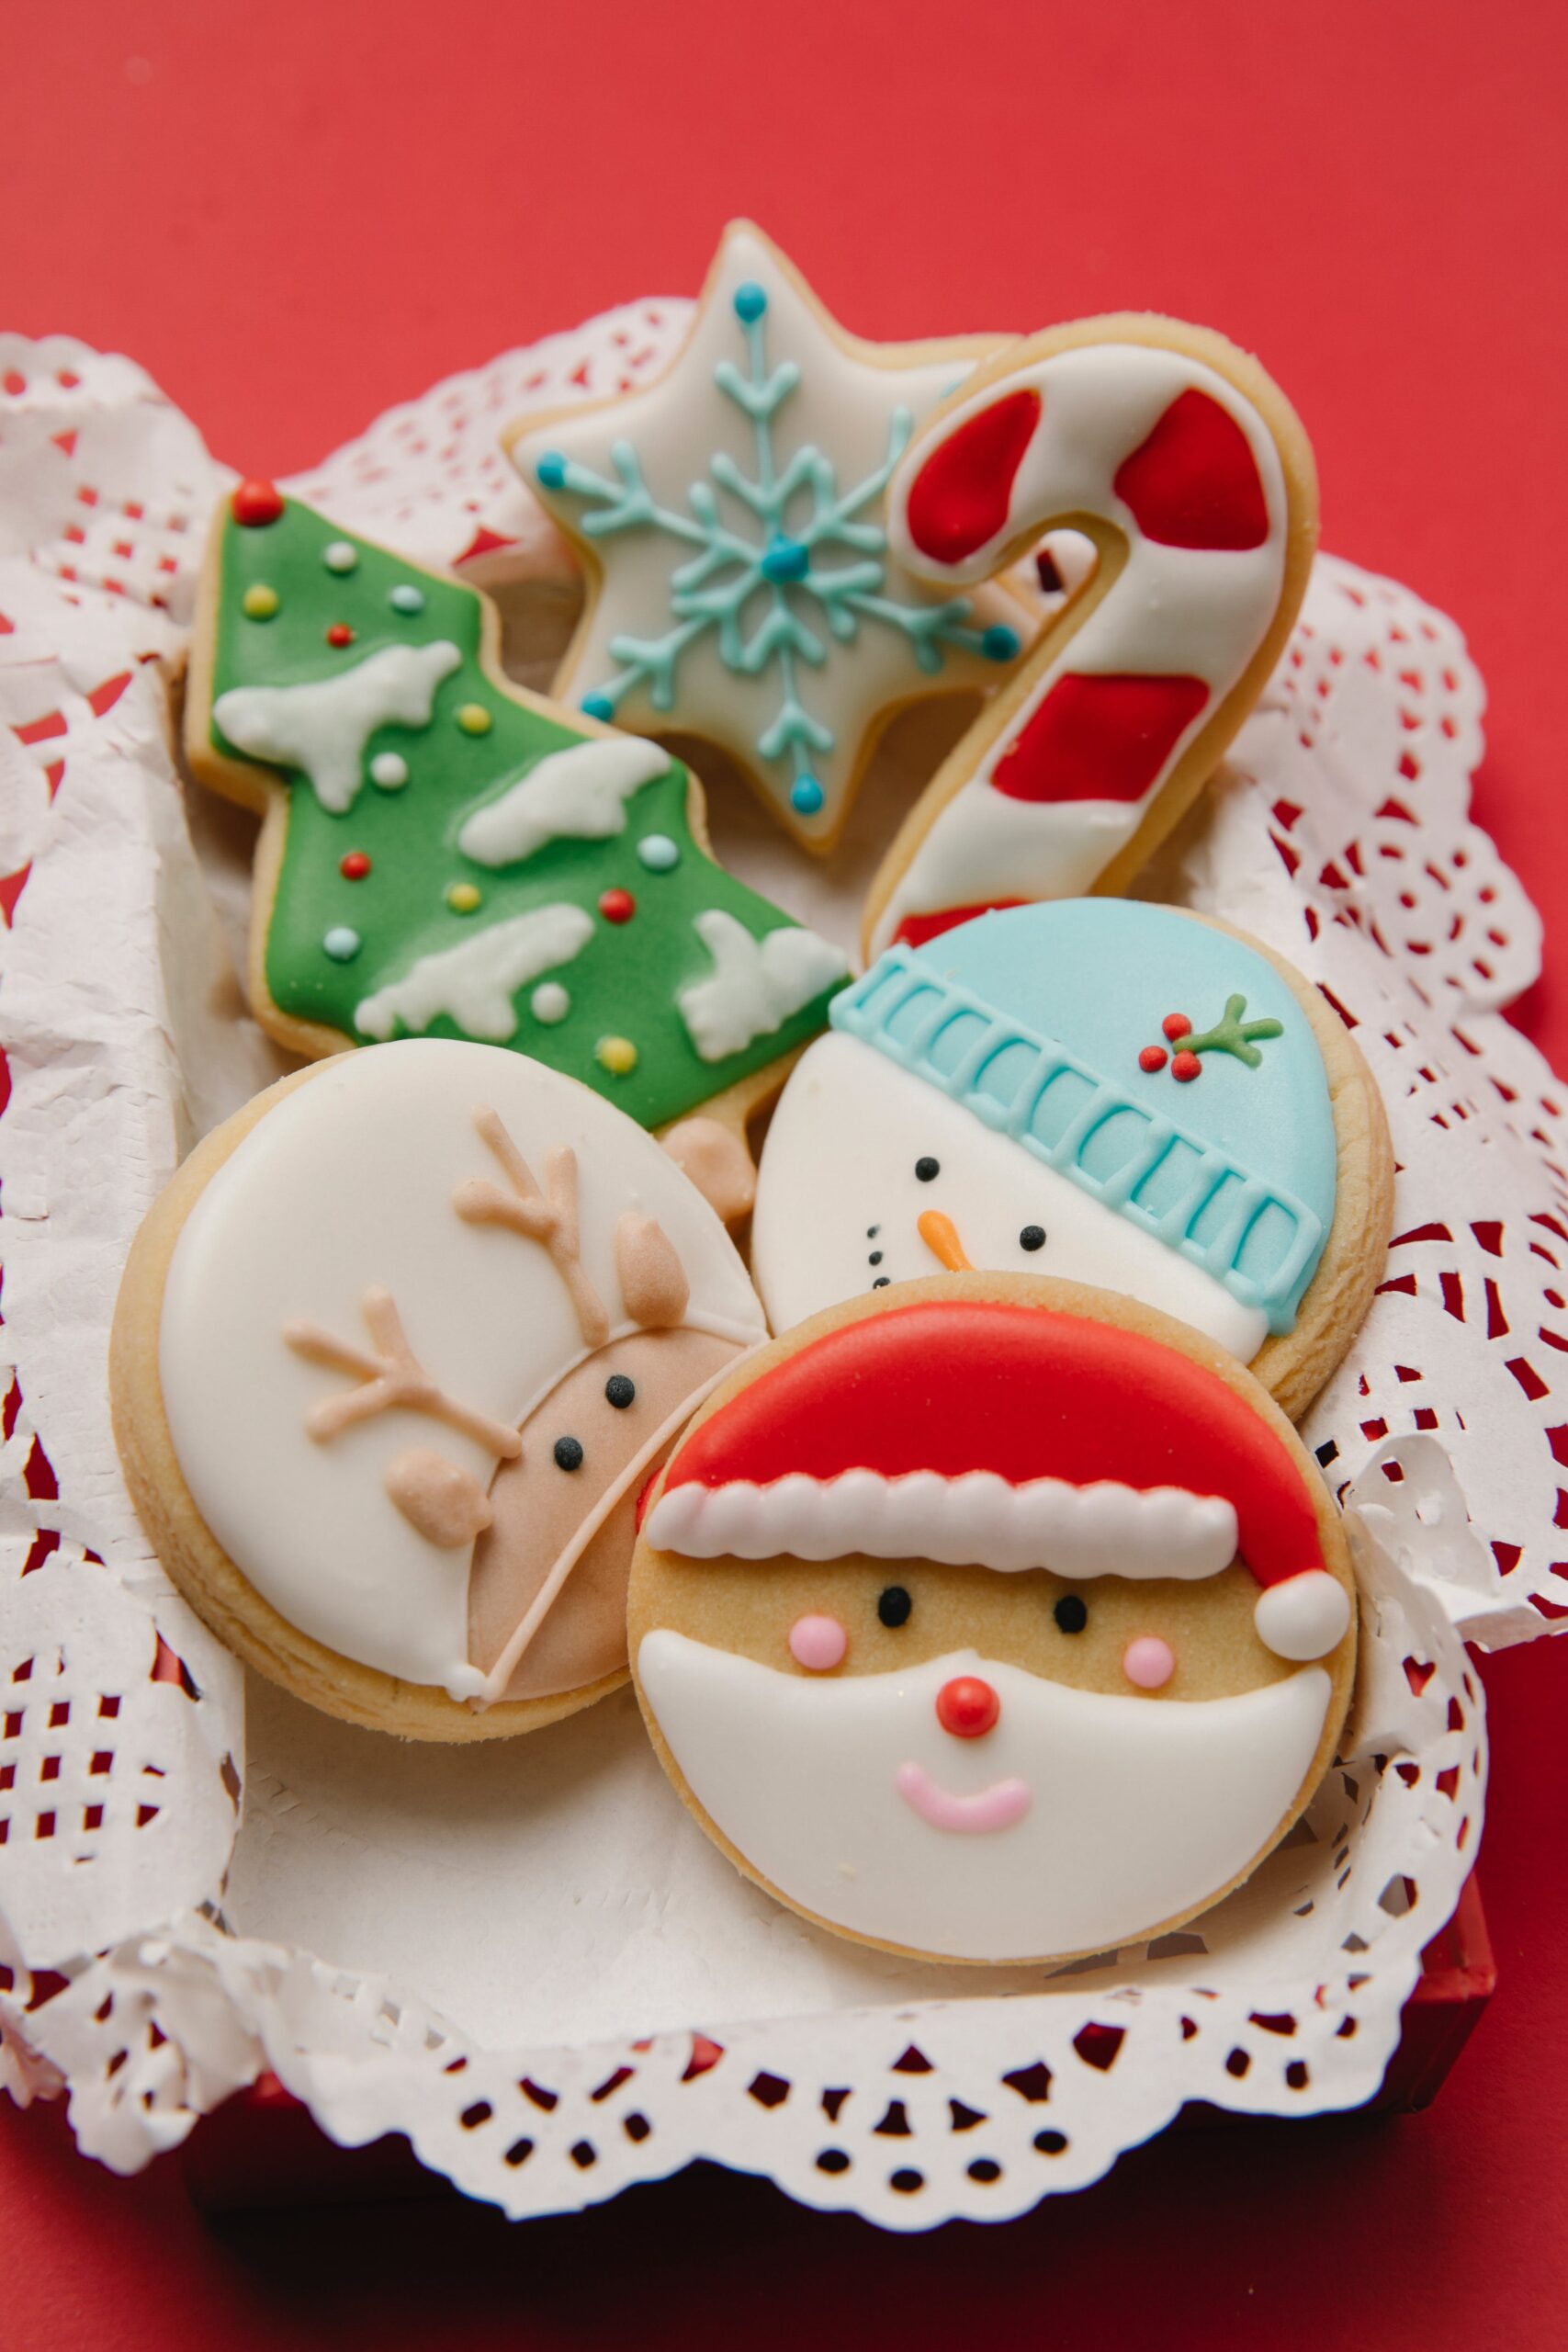 easy holiday cookies decorated with frosting to show santa claus, snowmen, and reindeer.